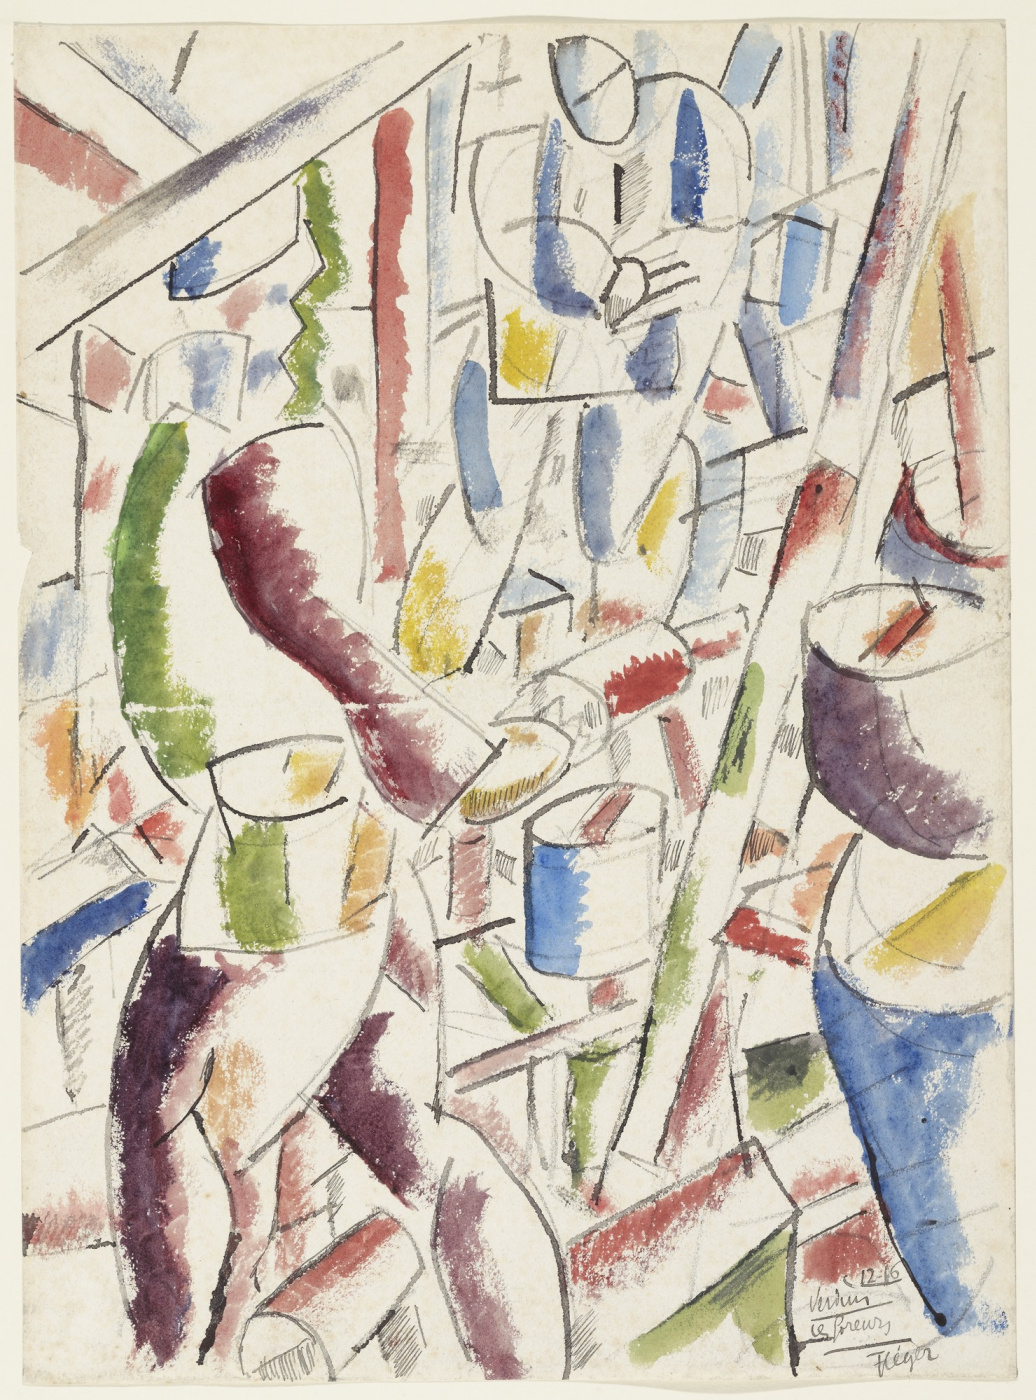 Fernand Leger. Verdun. The diggers of trenches